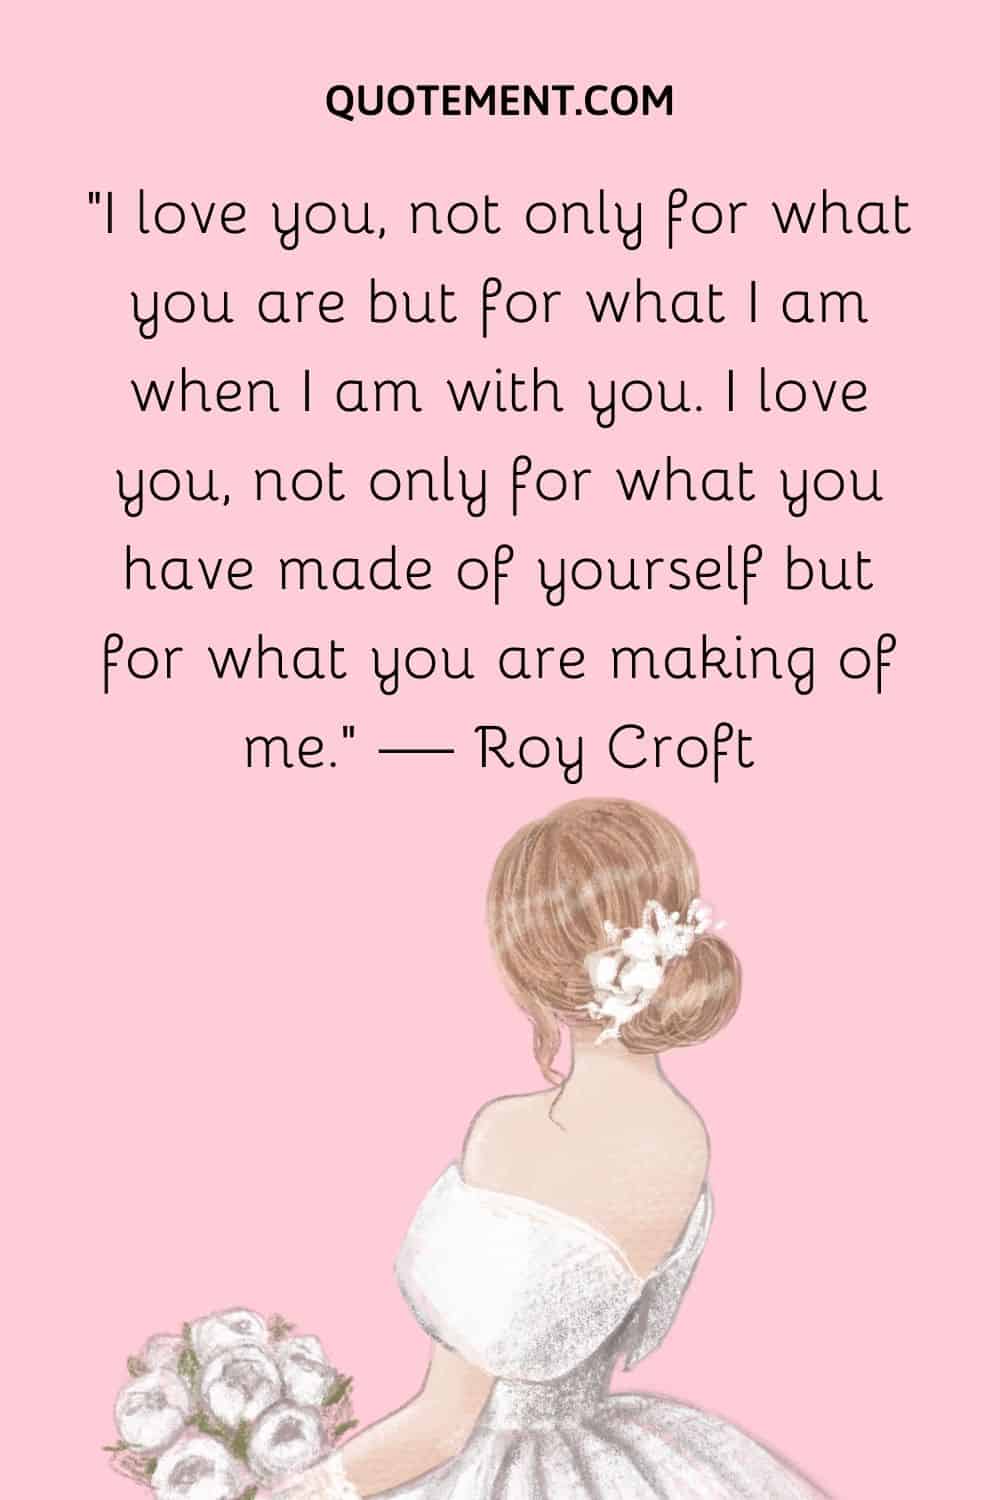 I love you, not only for what you are but for what I am when I am with you. I love you, not only for what you have made of yourself but for what you are making of me. — Roy Croft